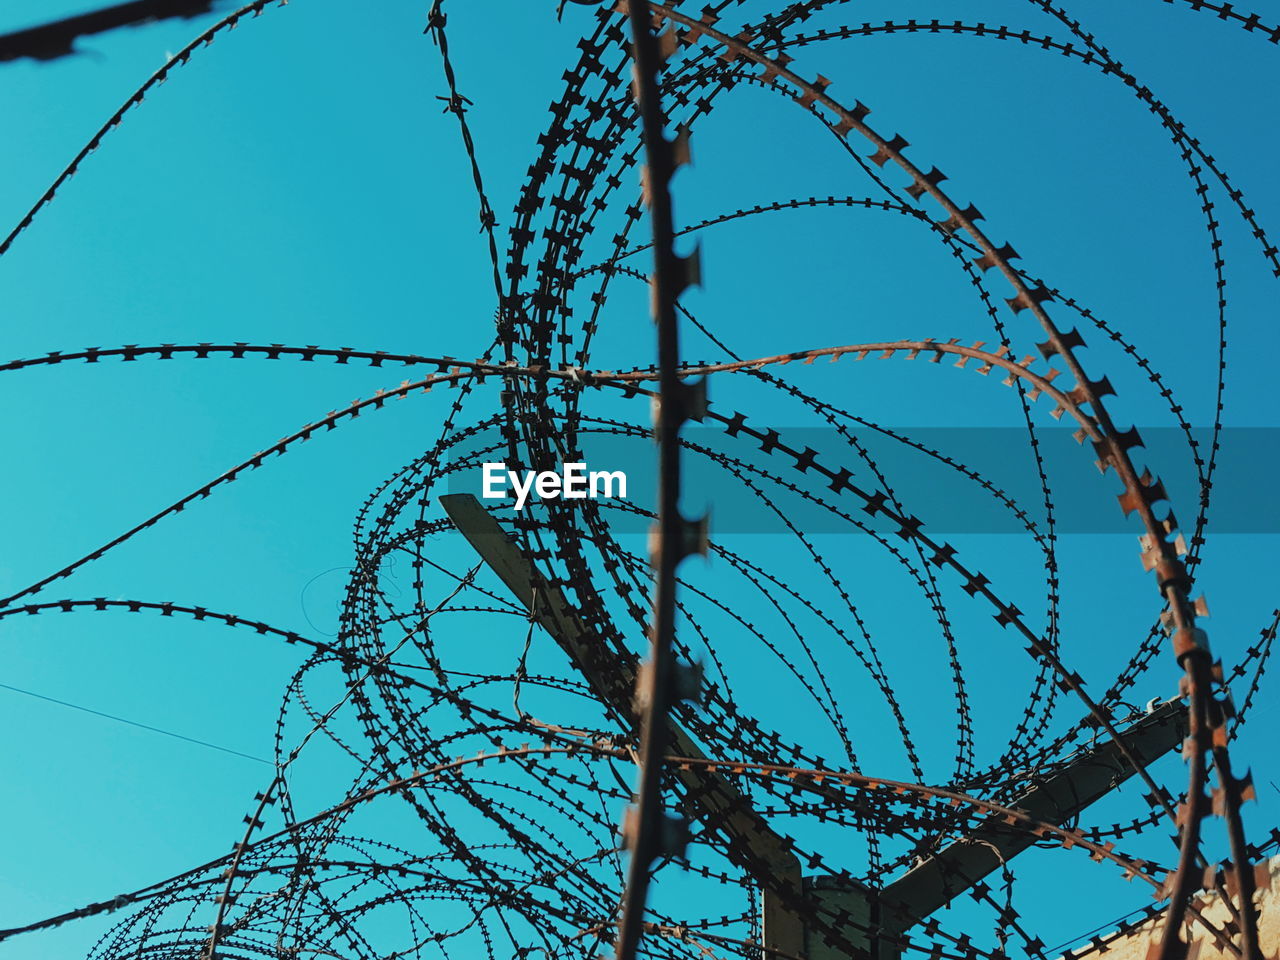 Close-up of spiral razor wire fence